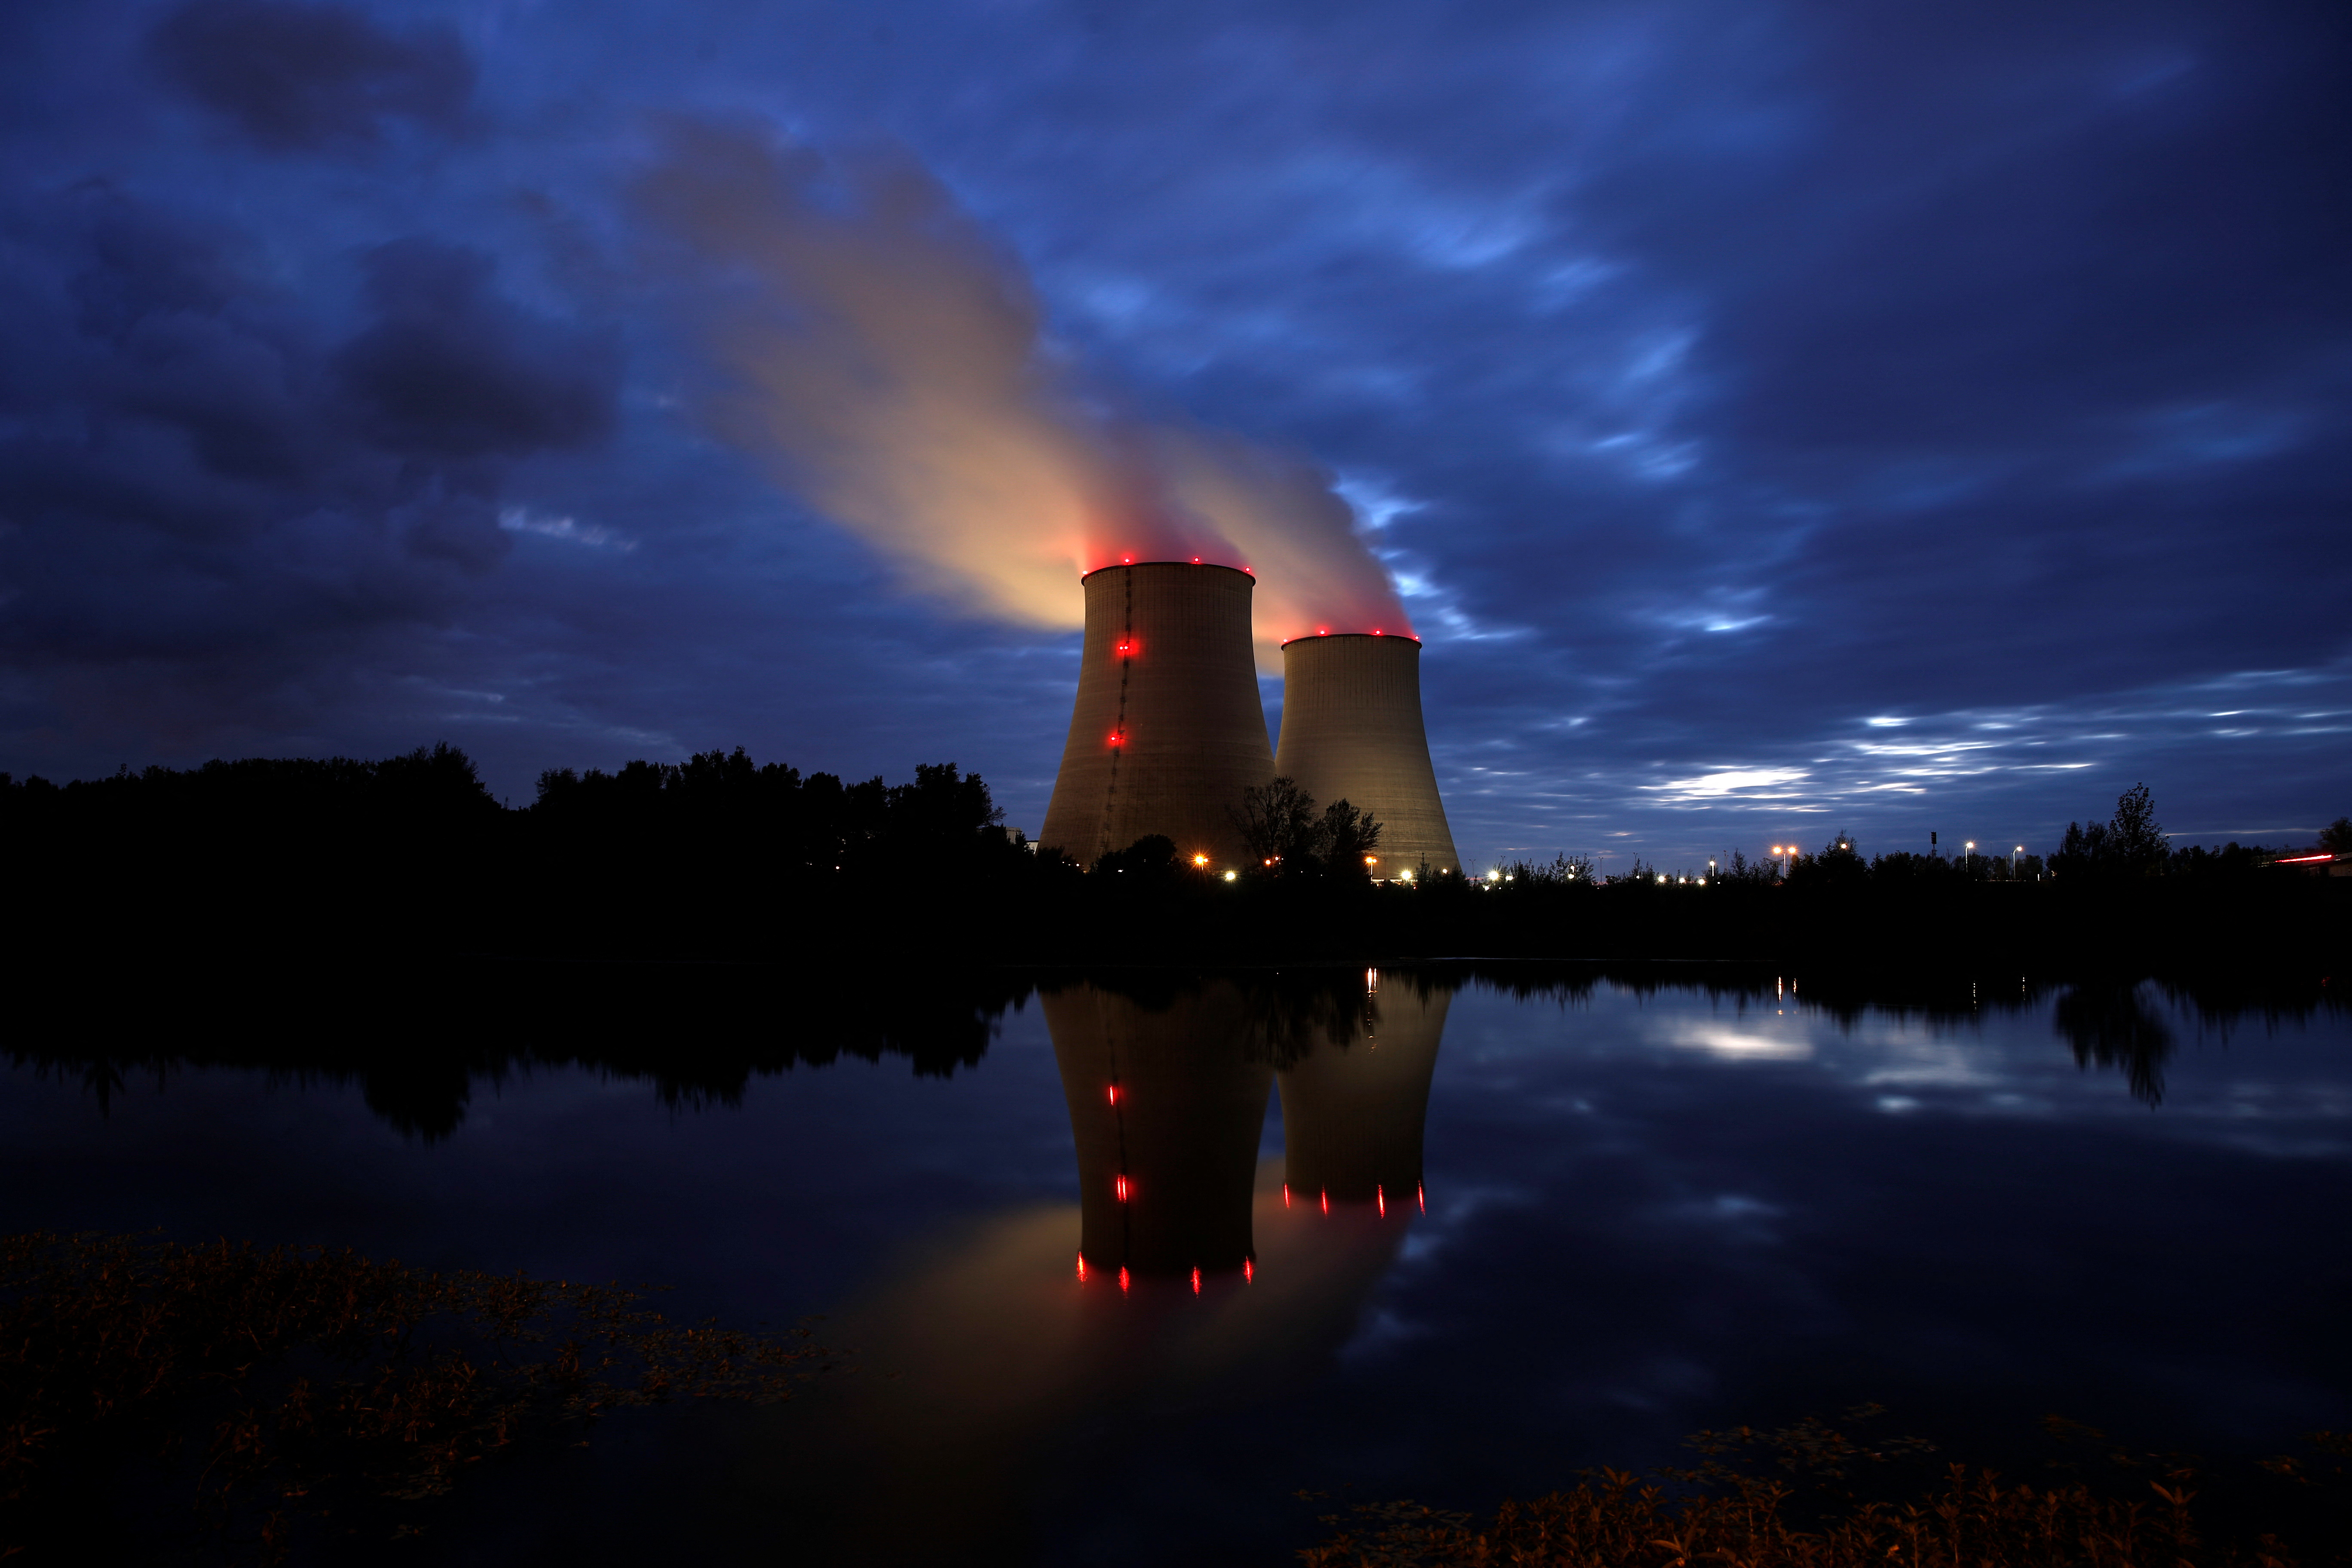 Steam rises from cooling towers of the Electricite de France (EDF) nuclear power plant in Belleville-sur-Loire, France October 12, 2021. REUTERS/Benoit Tessier